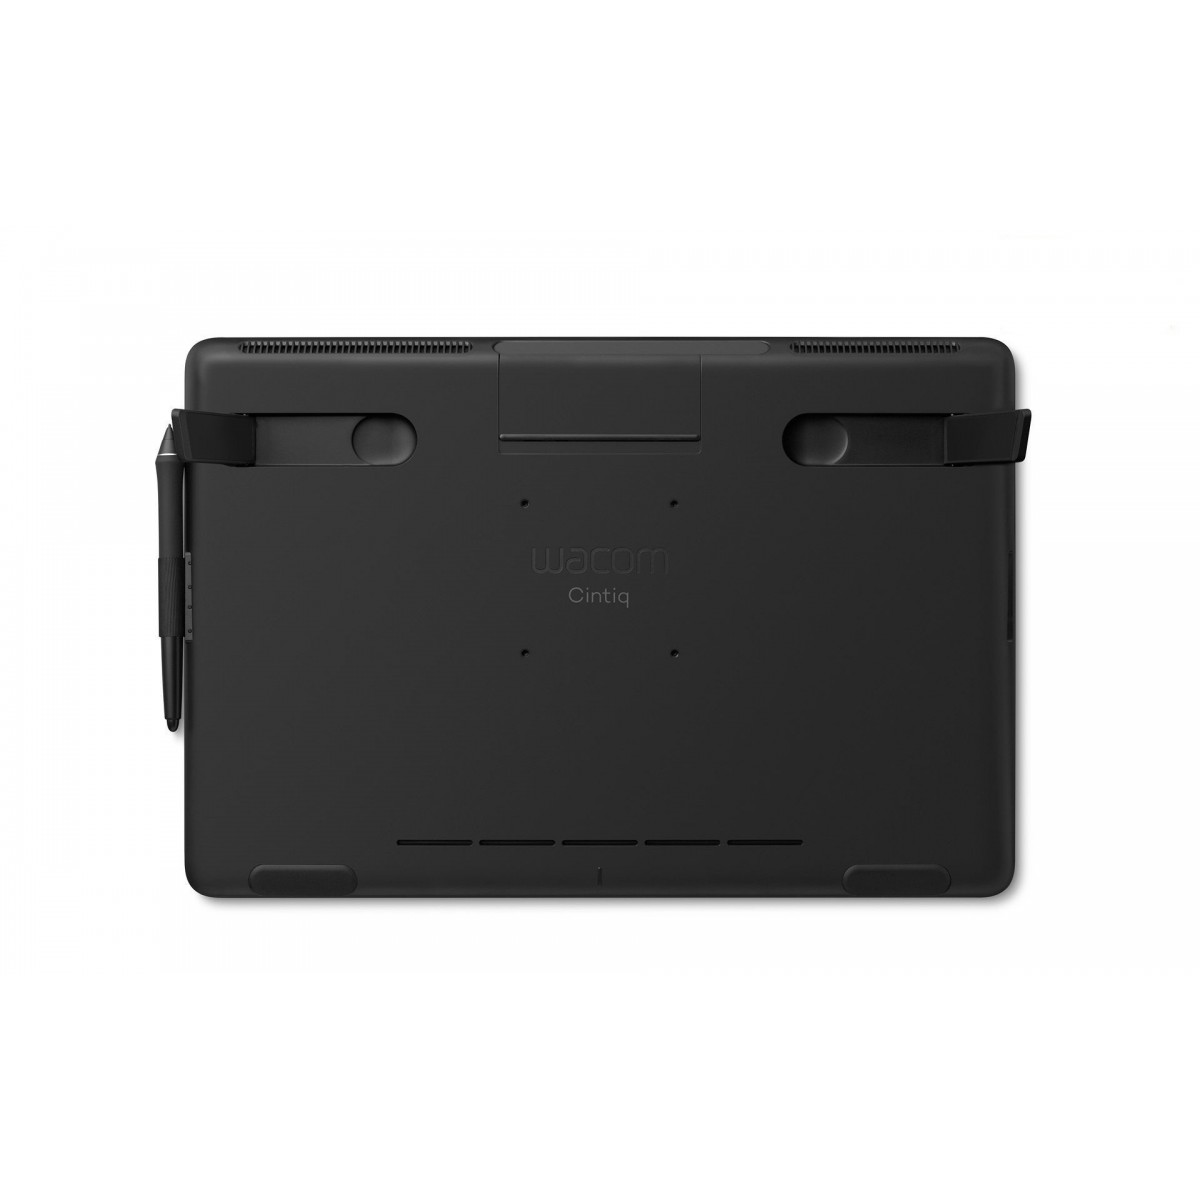 Wacom Cintiq 16 - Wired - 344 x 194 mm - USB - Pen - Scroll down - Scroll up - Zoom in - Zoom out - 39.6 cm (15.6")